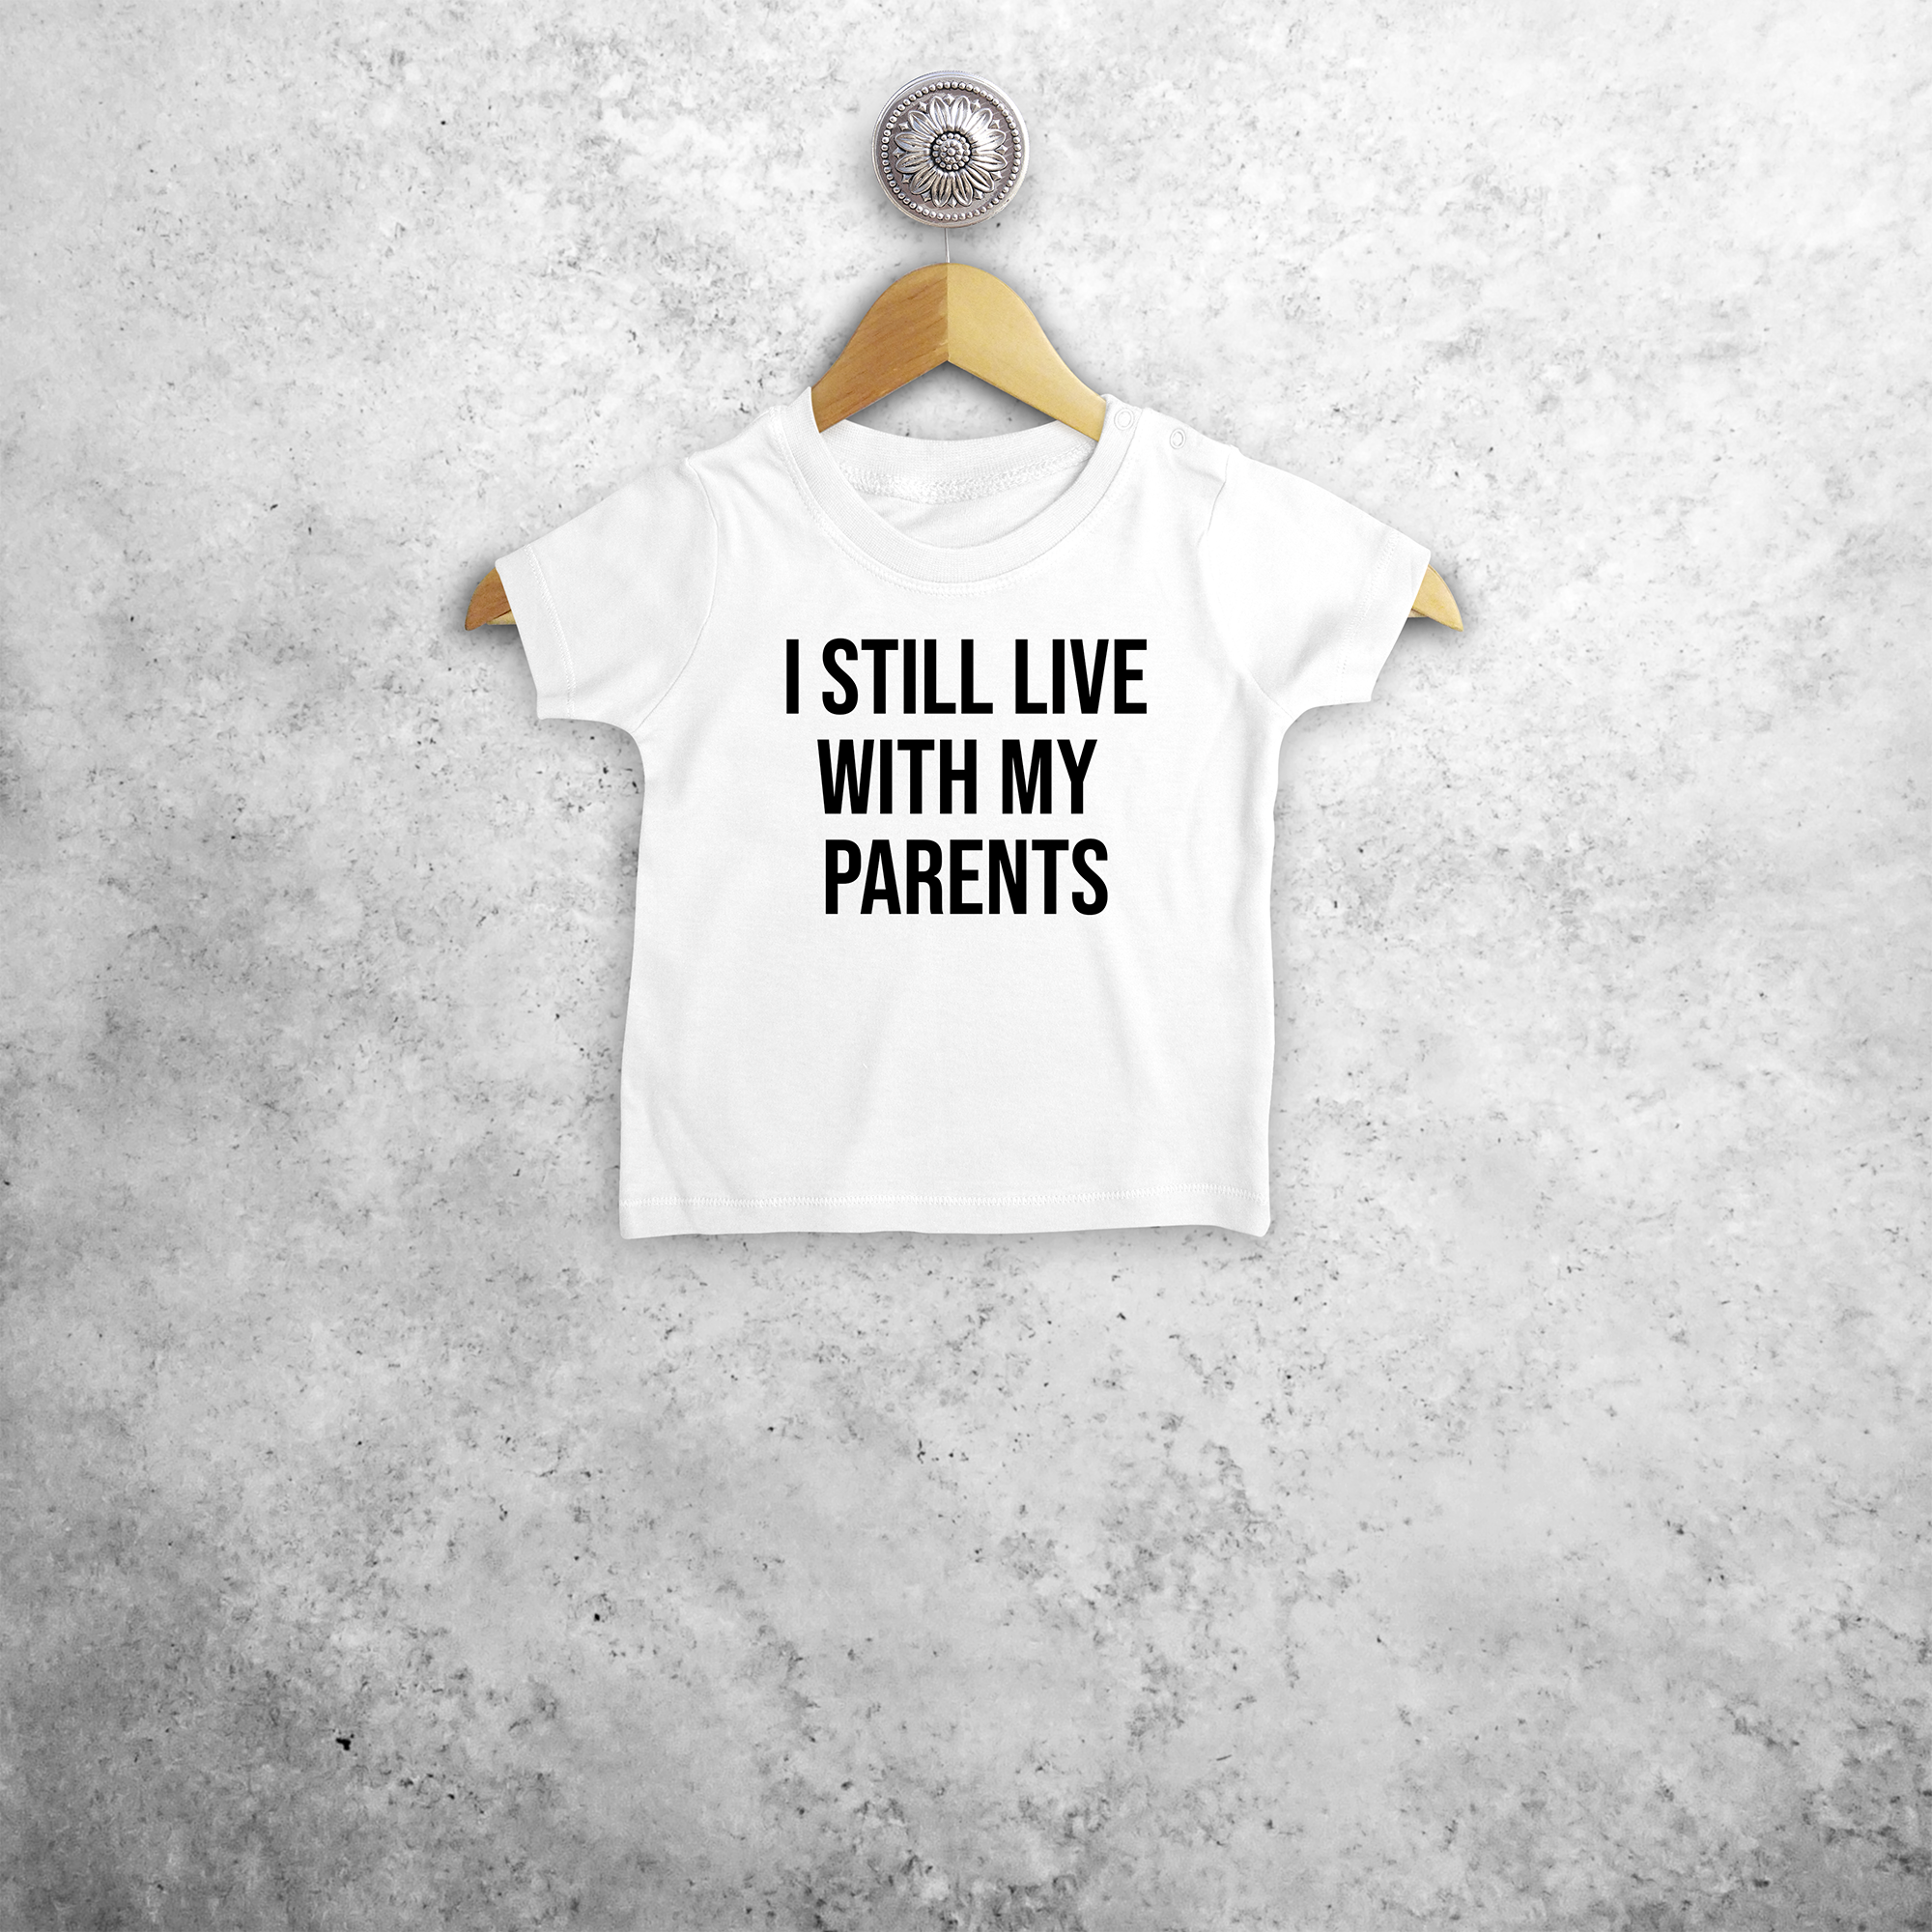 'I still live with my parents' baby shortsleeve shirt